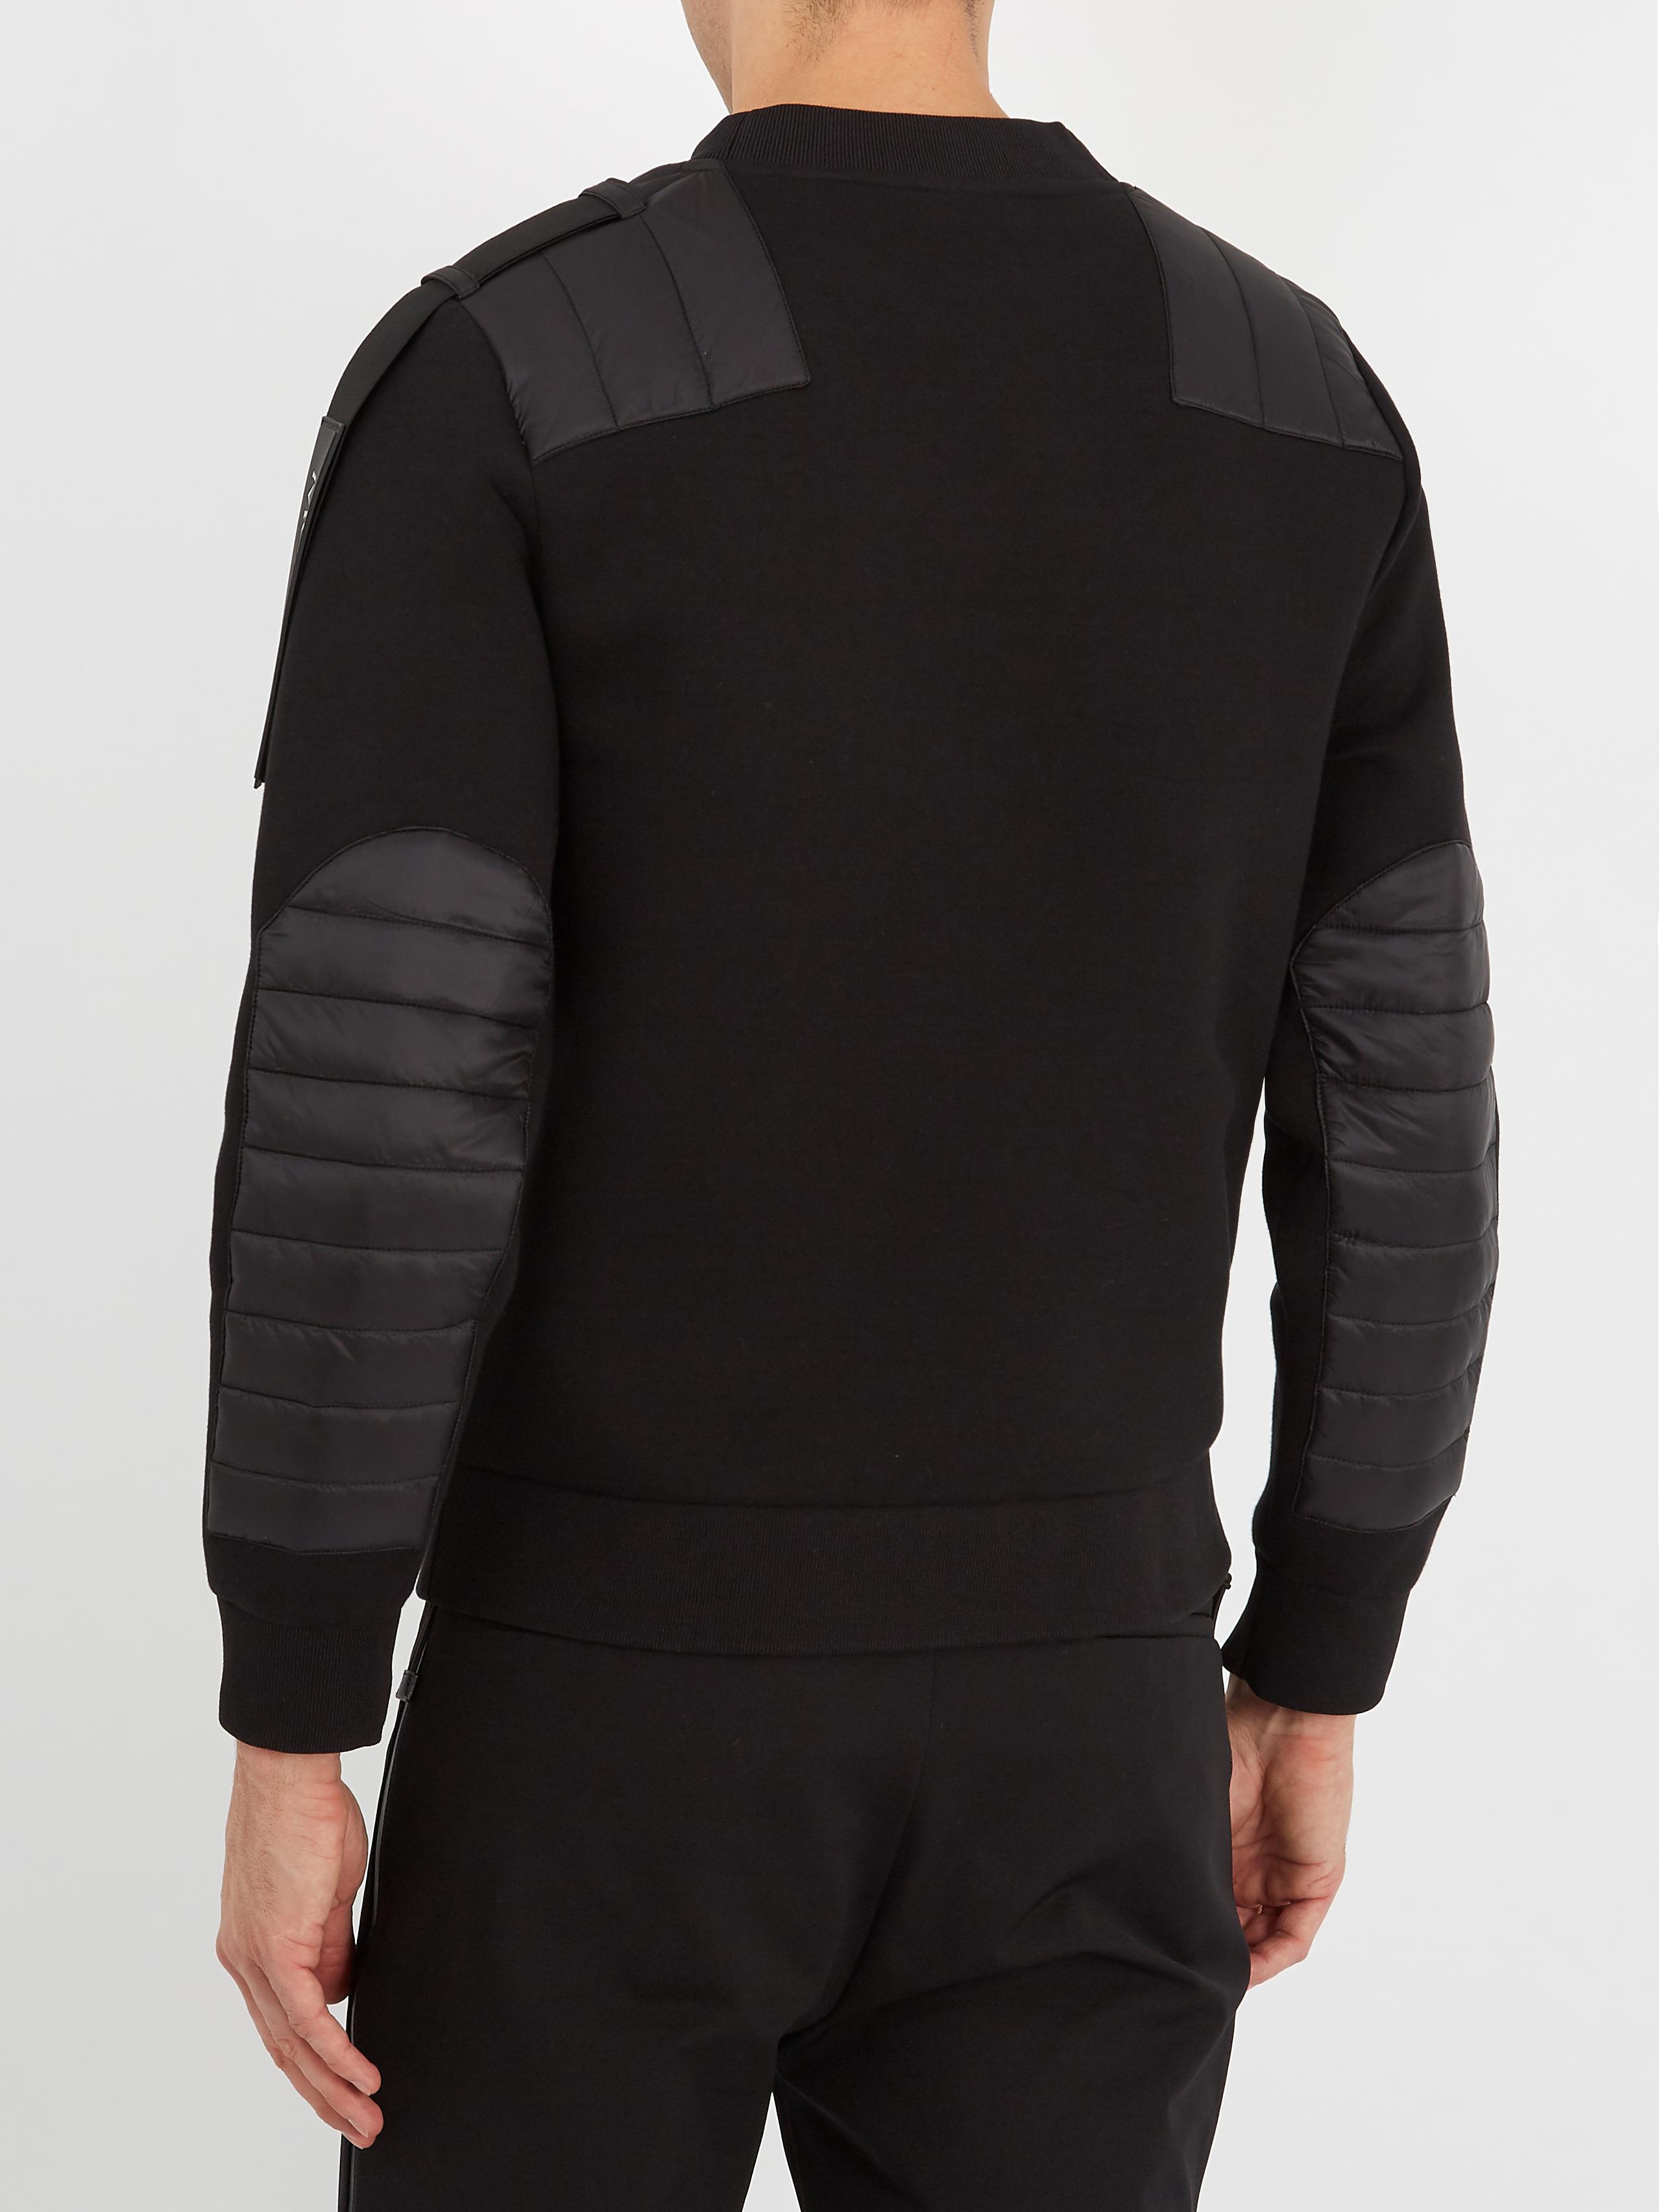 Moncler X Craig Green Crew-neck Cotton Sweater in Black for Men | Lyst